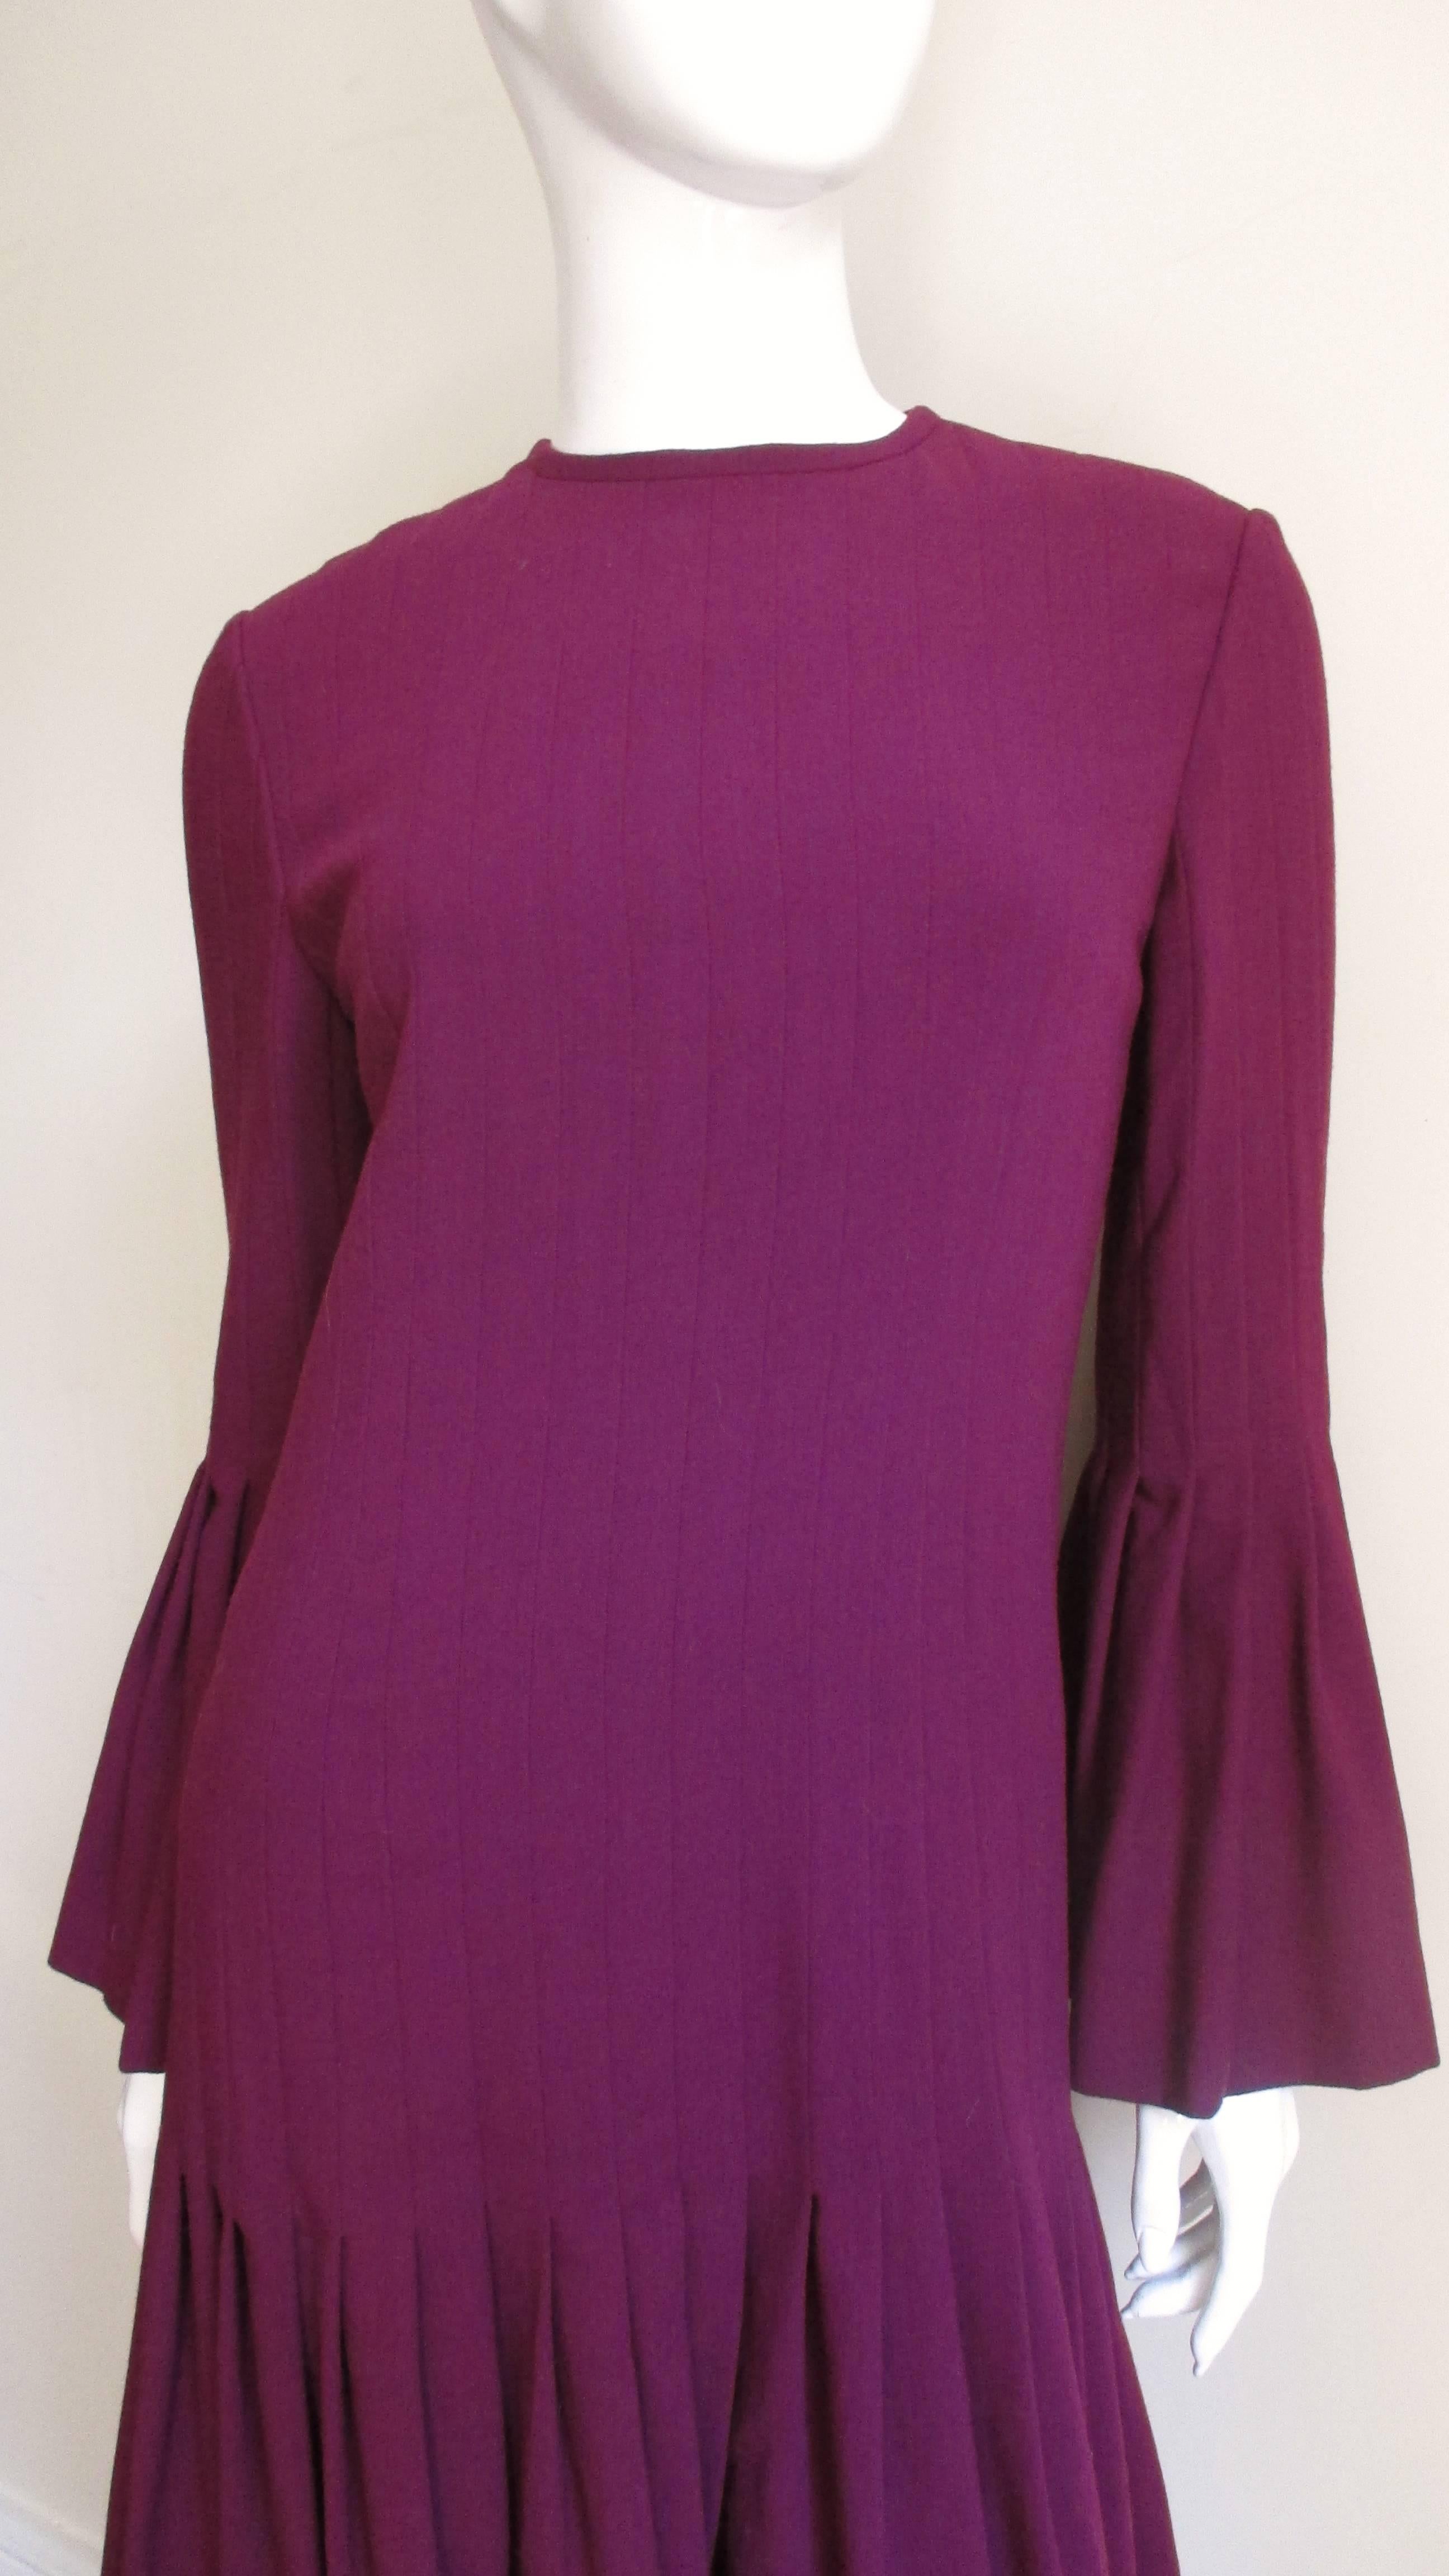 A beautiful wool dress from Pierre Cardin in burgundy wool crepe.  The body of the dress and the sleeves consist of vertical tucks which are released at the lower hips and on the sleeves just below the elbows.  This creates a flirty skirt from a